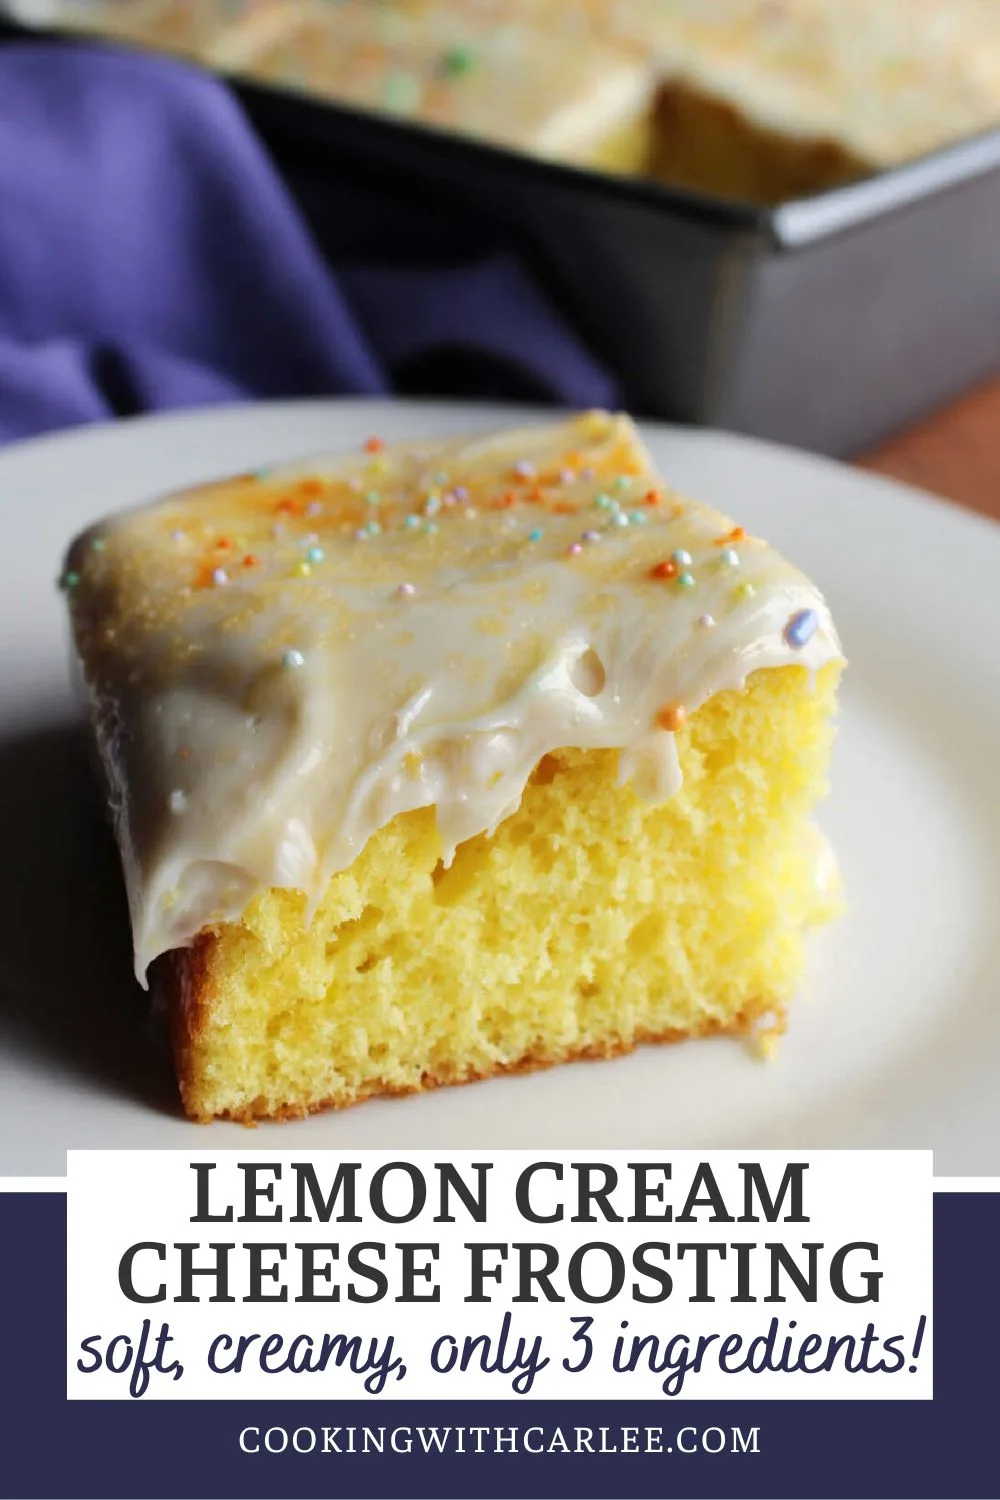 Creamy lemon cream cheese frosting with condensed milk only takes 3 ingredients to make. It is perfect for smoothing over a 9x13-inch cake.